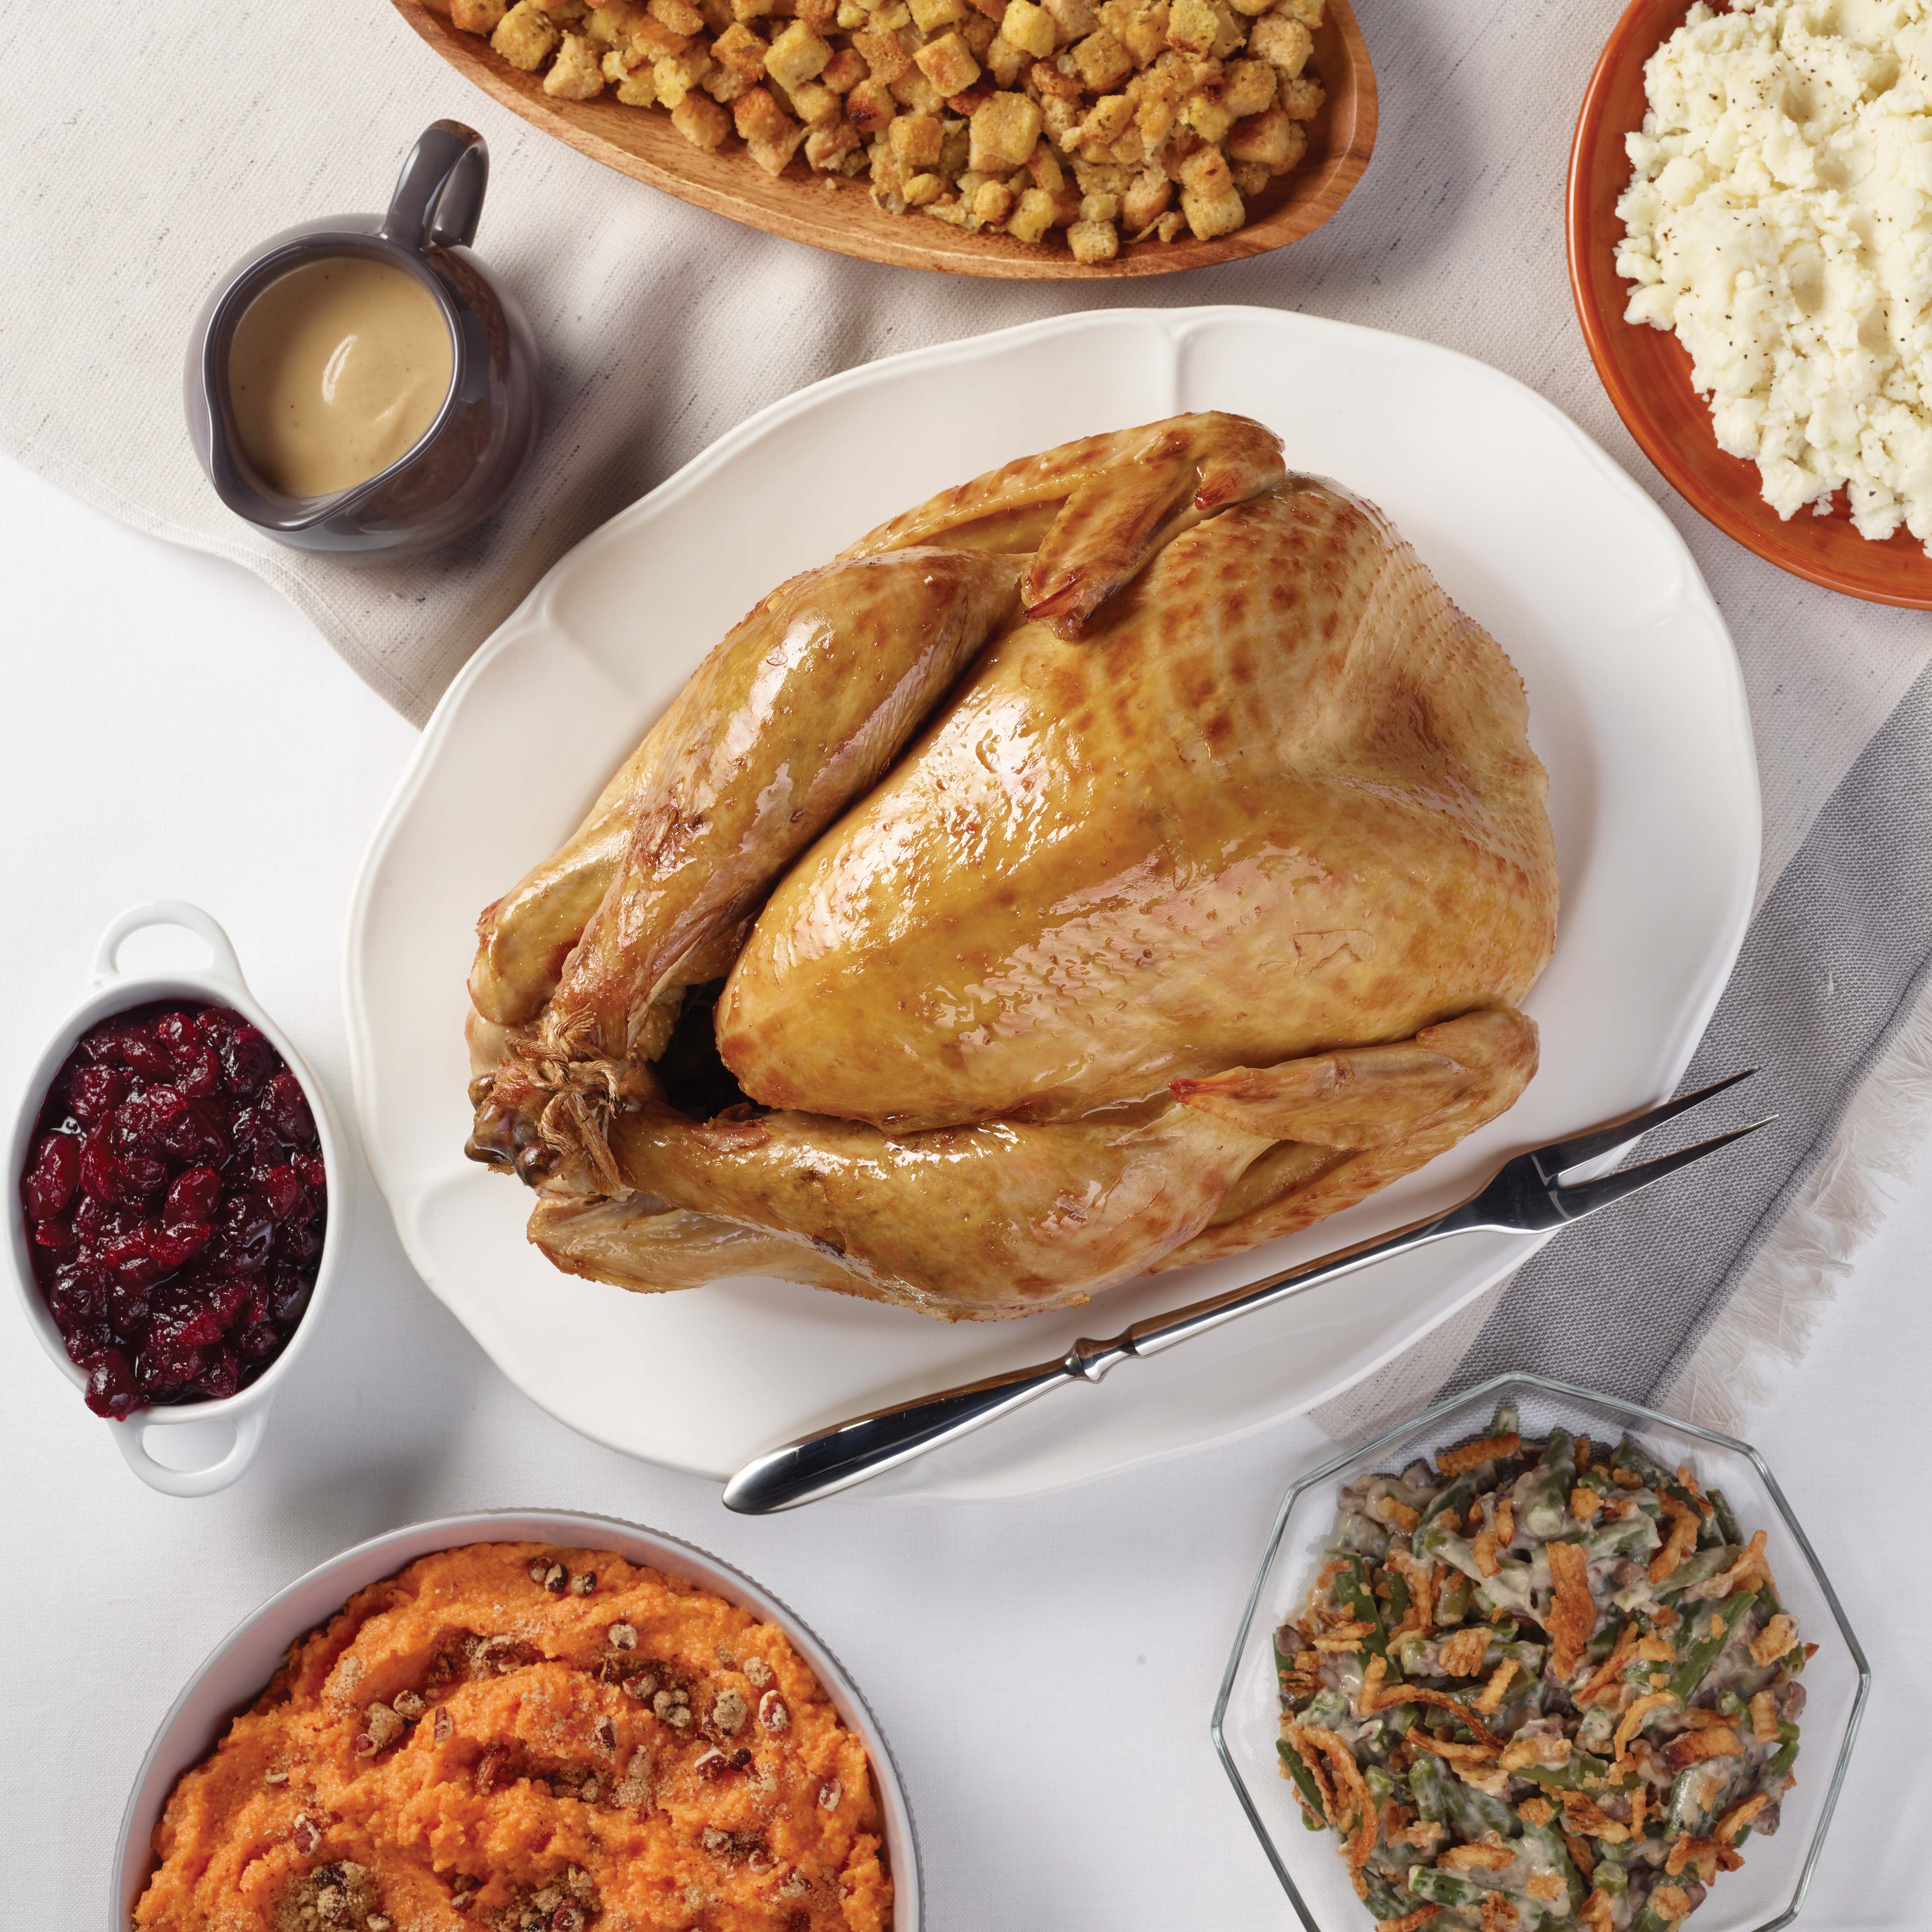 Meal Simple by HEB Fully Cooked Whole Natural Turkey & Sides Holiday